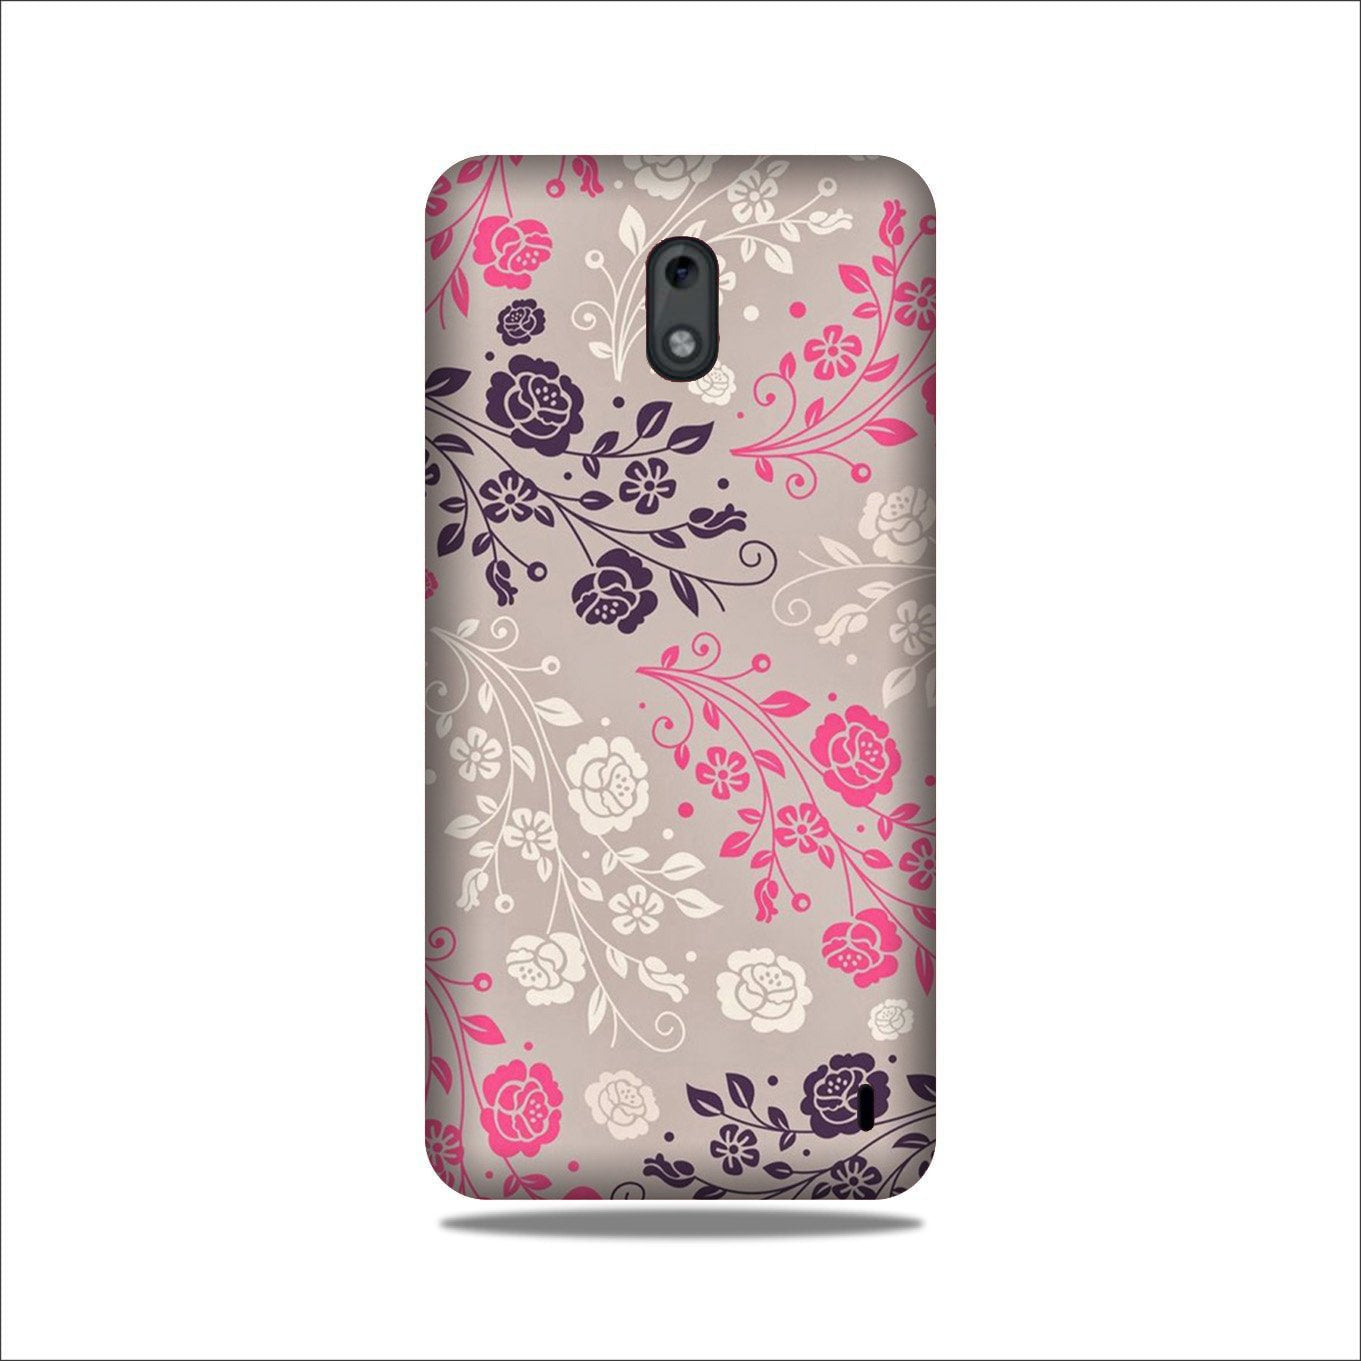 Pattern2 Case for Nokia 3